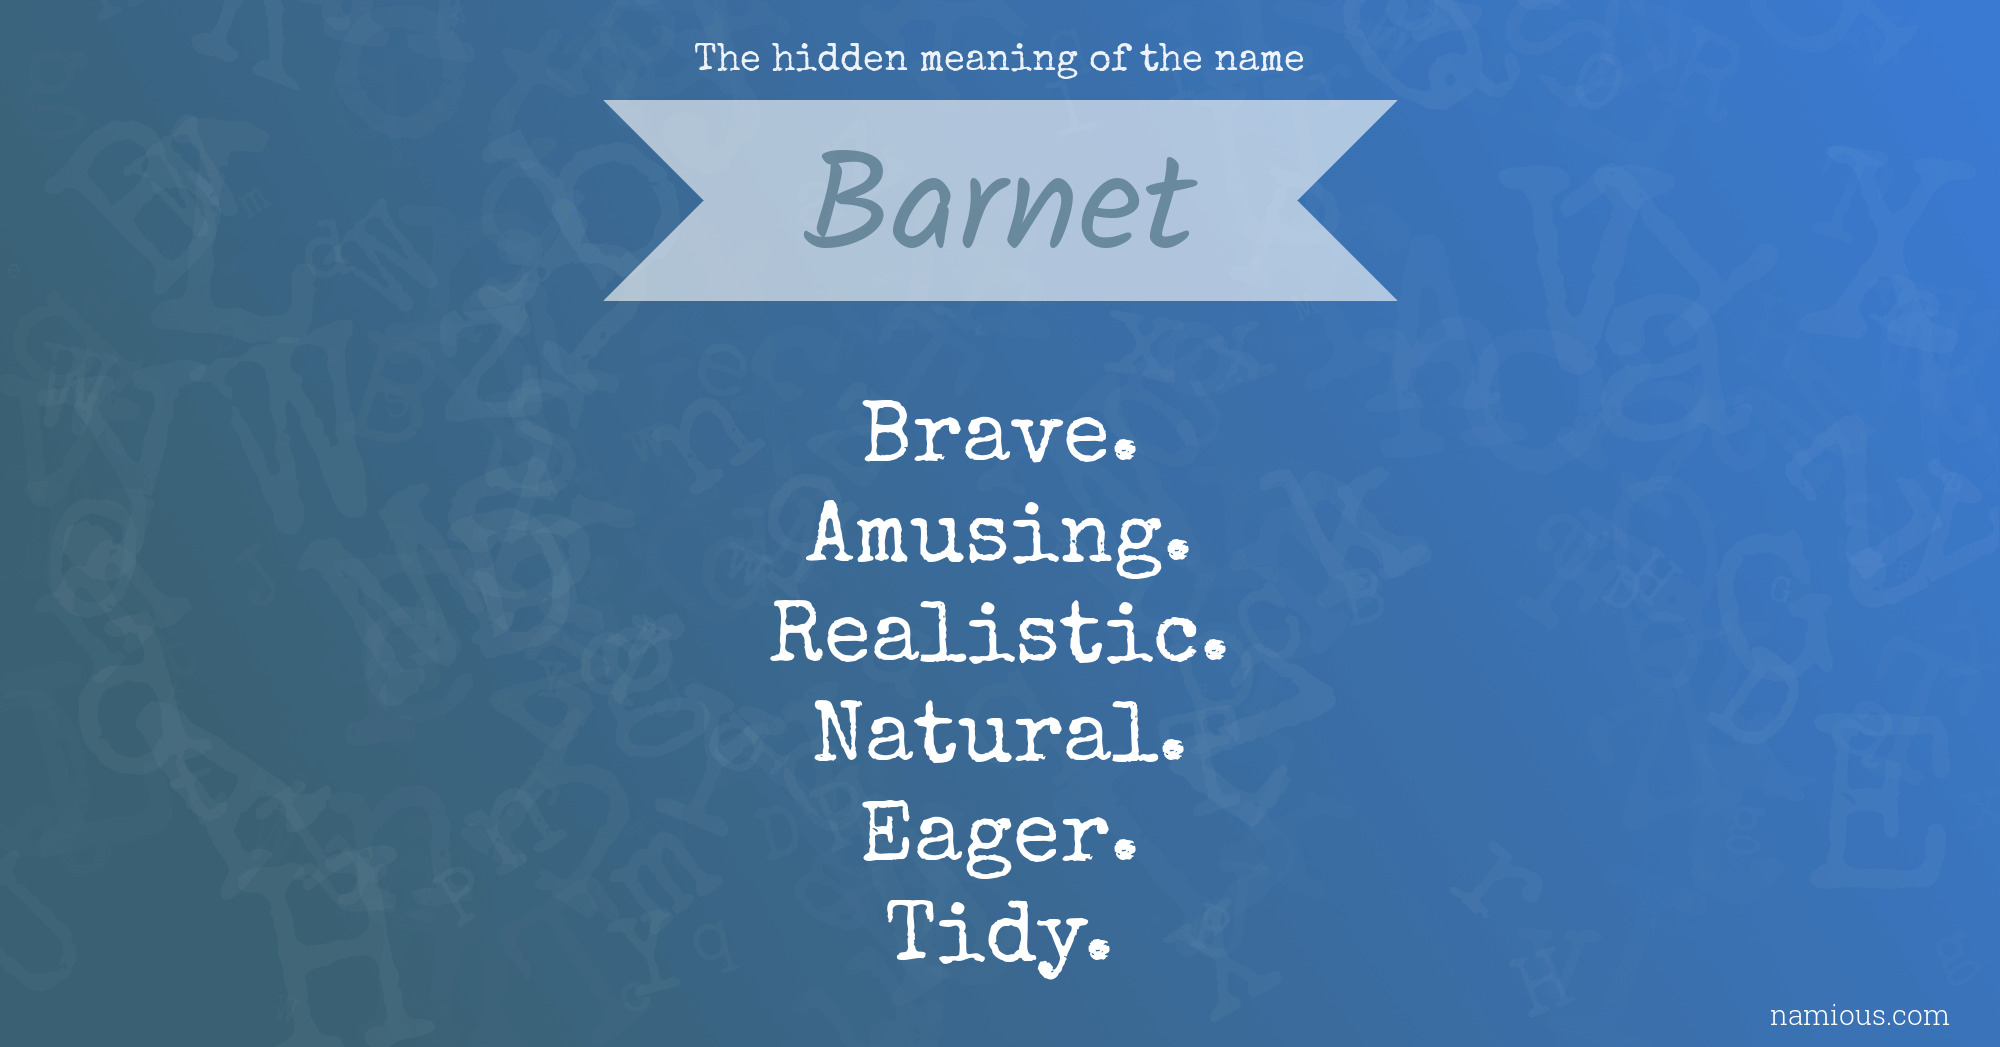 The hidden meaning of the name Barnet